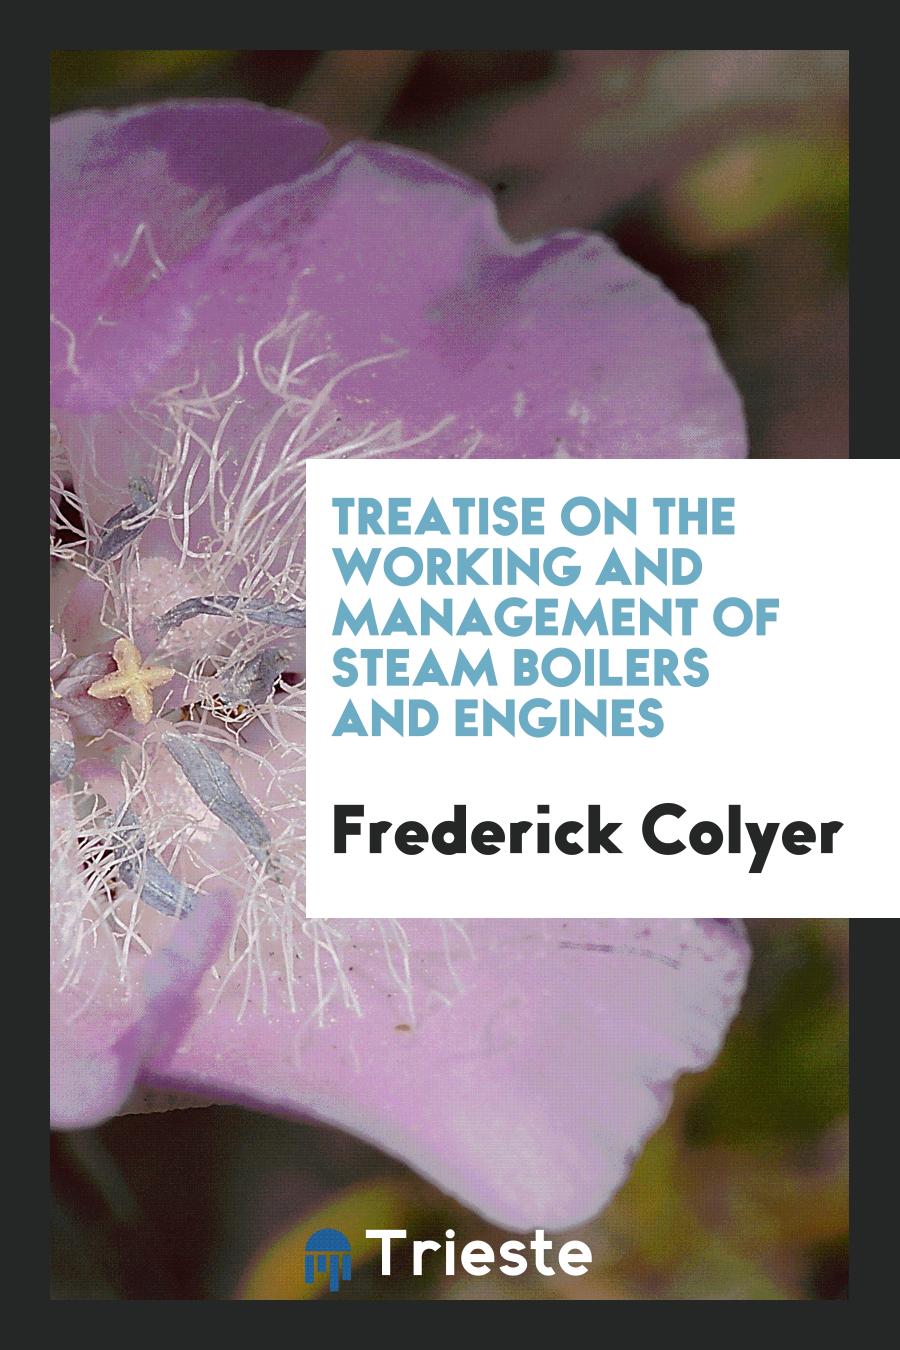 Treatise on the working and management of steam boilers and engines